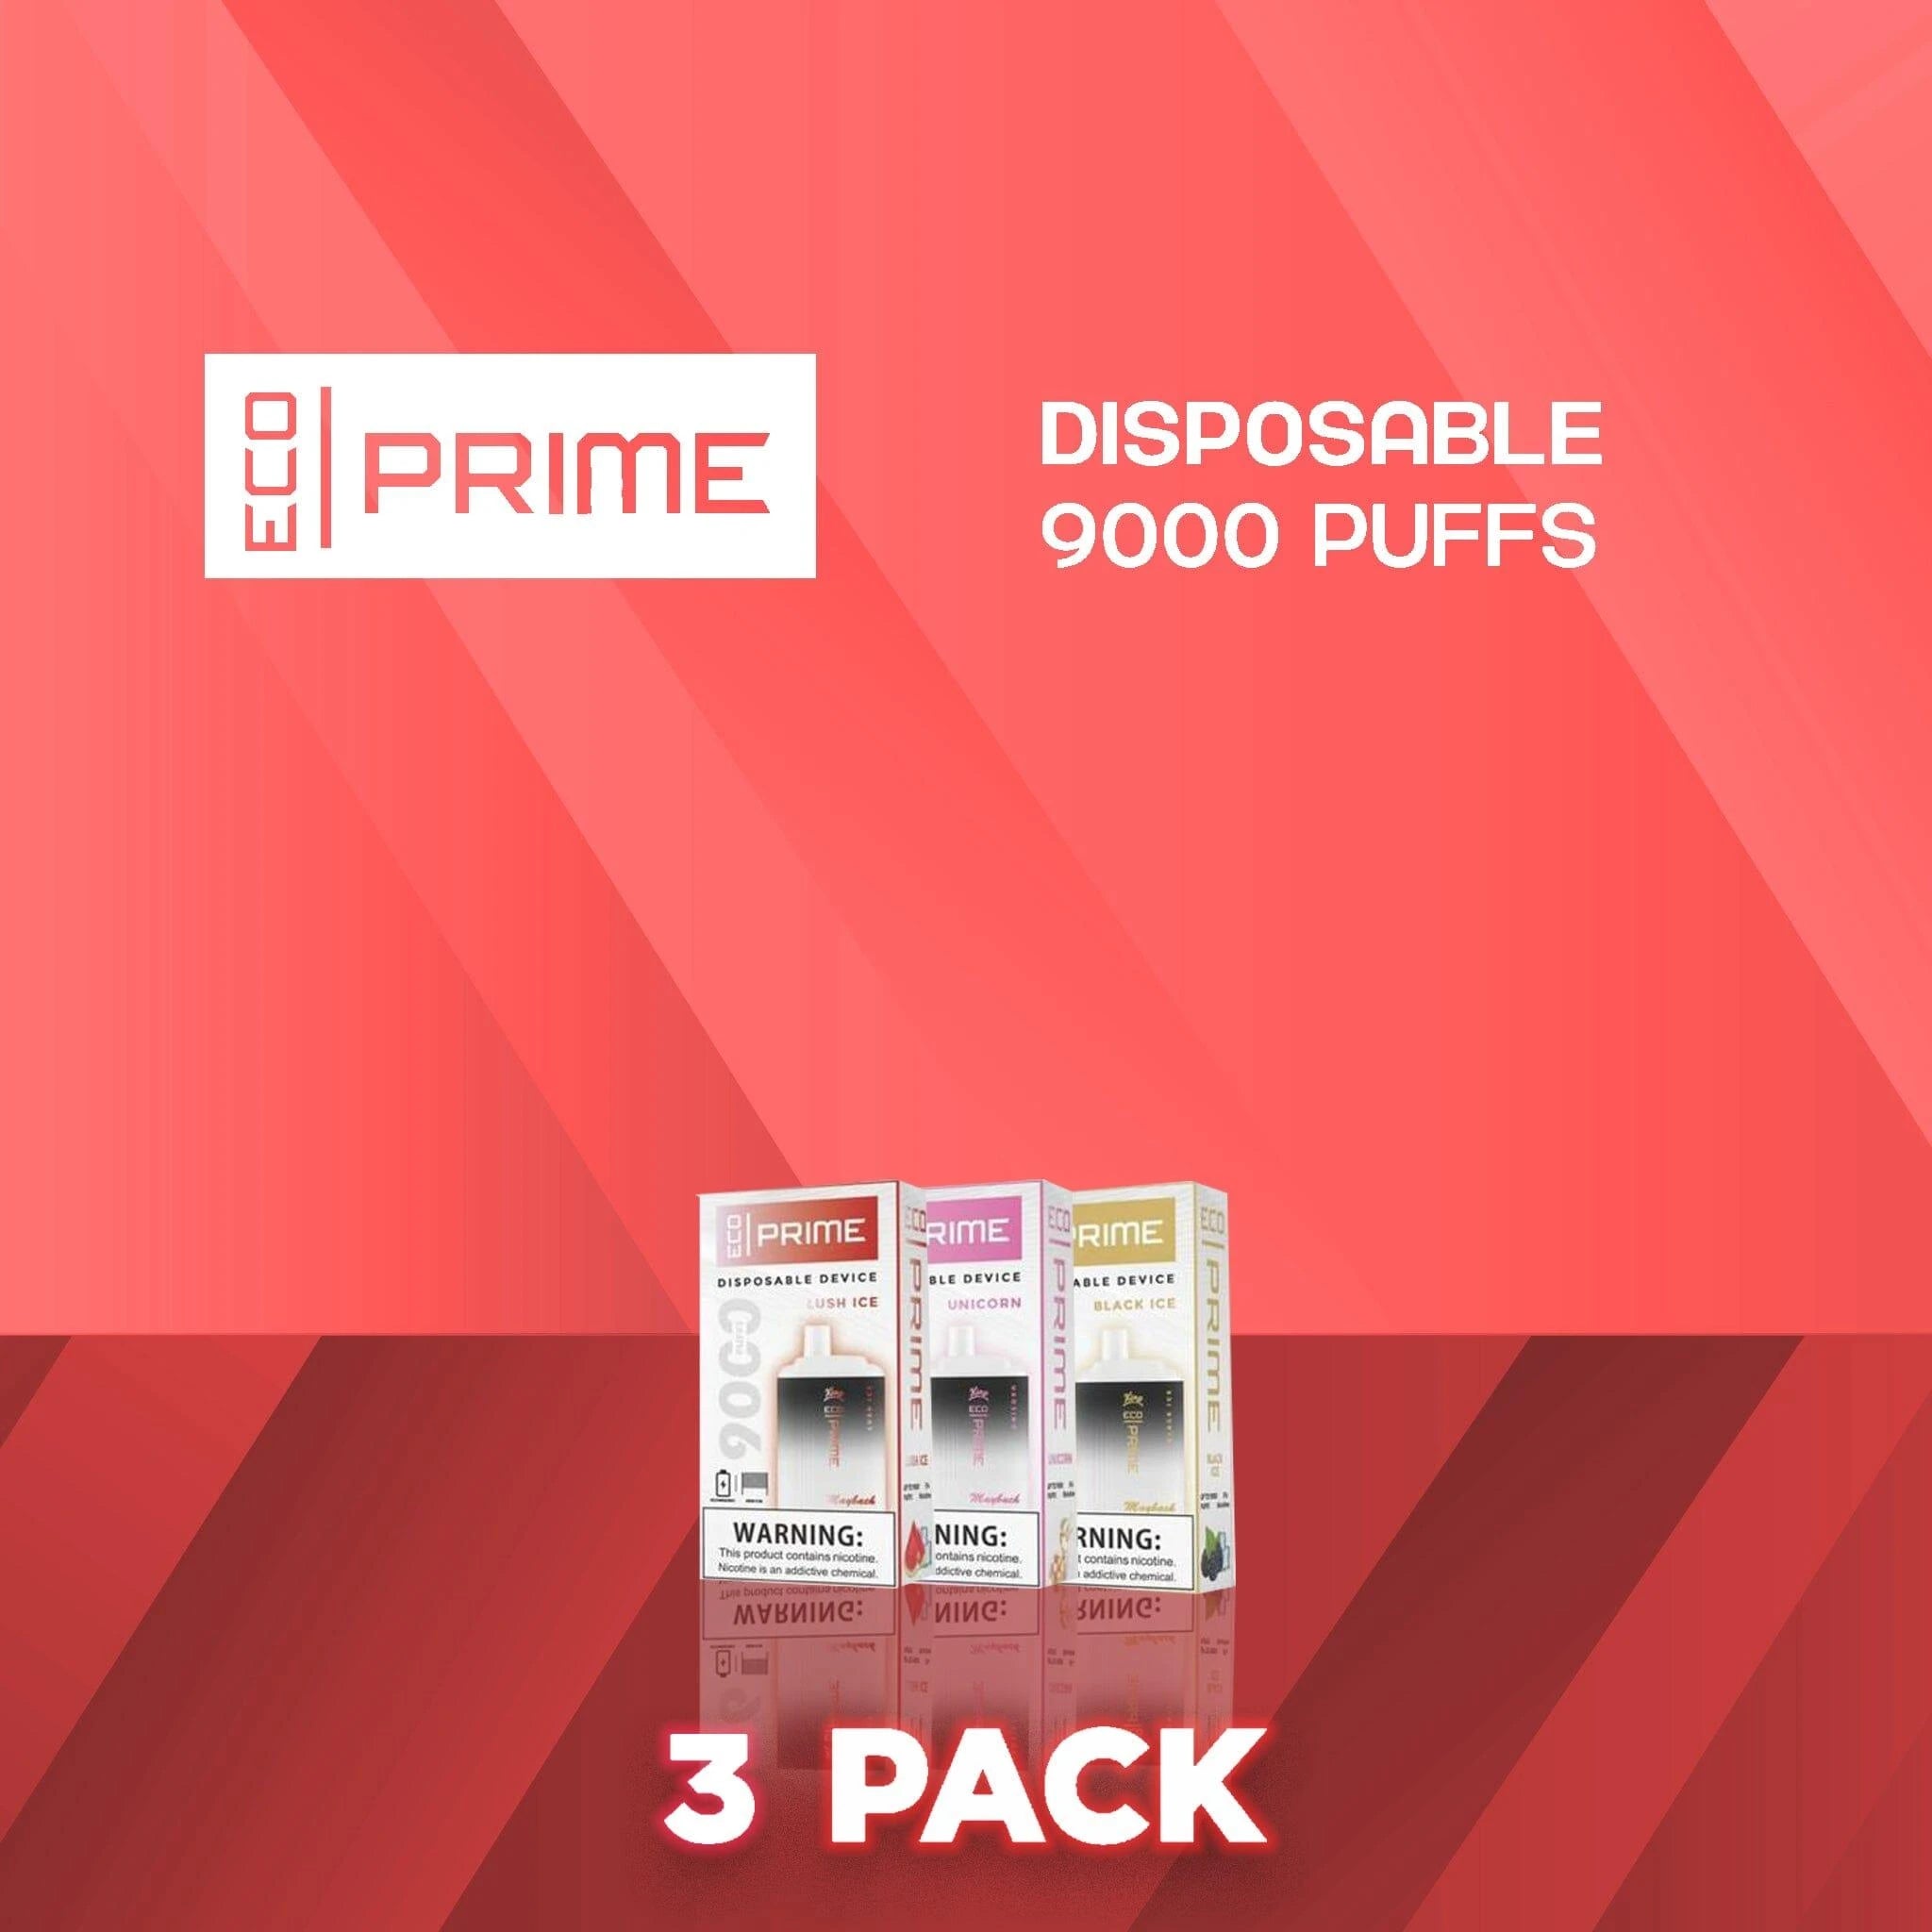 Eco Prime 9000 Puffs Disposable Vape - 3 Pack